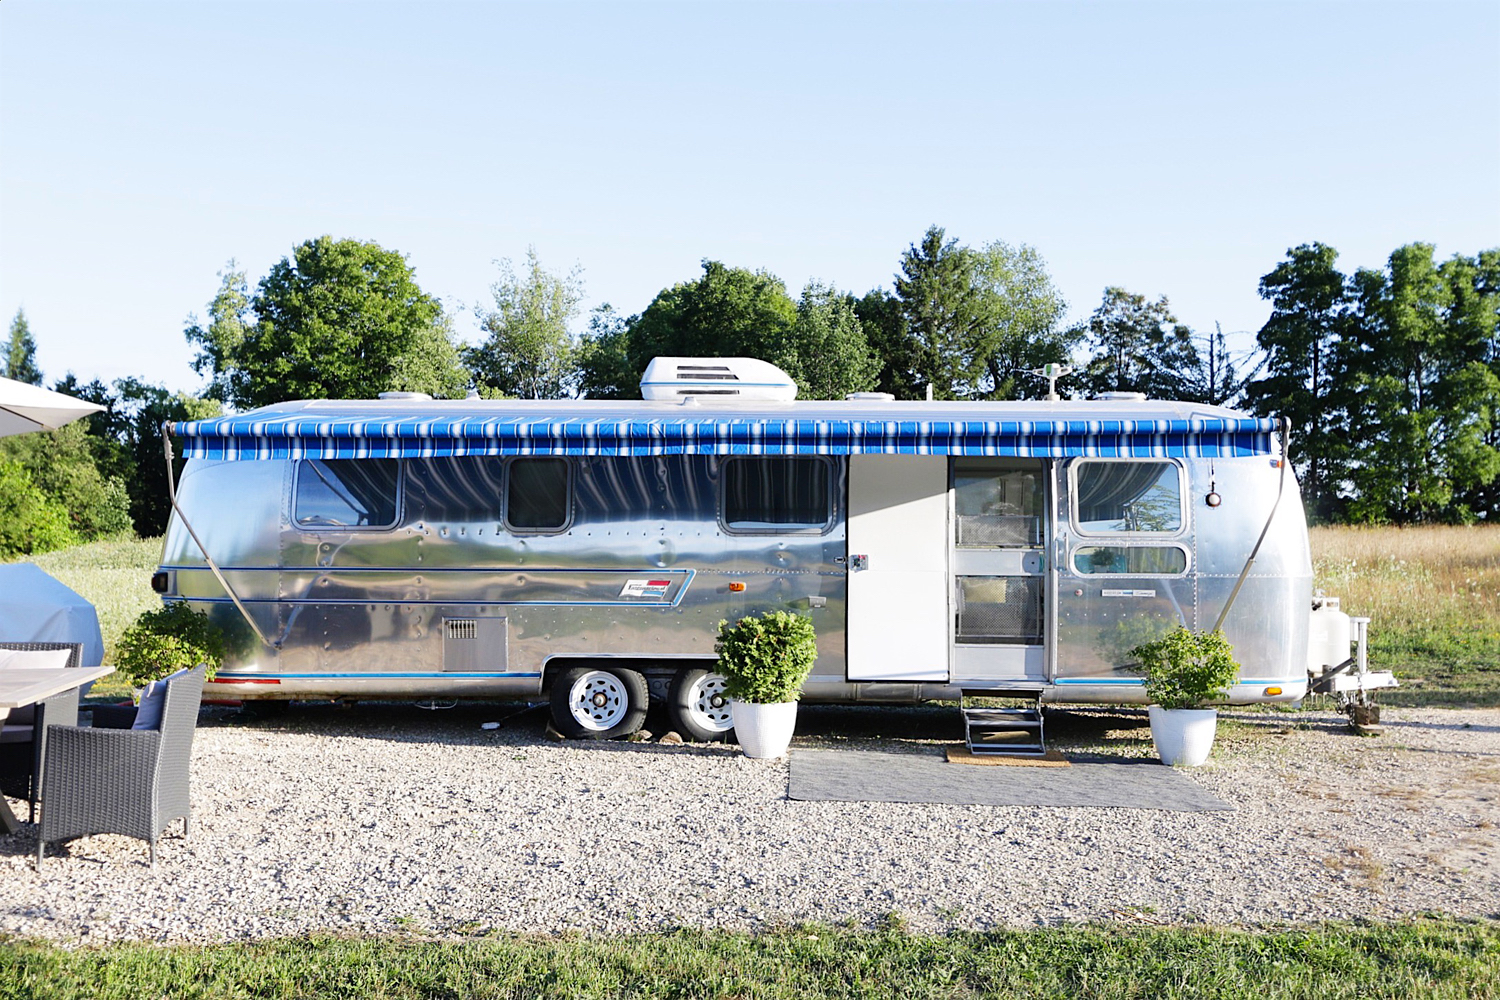 Dreamy Airstreamy is available for rent via @lynneknowlton https://lynneknowlton.com/airstream-vacation-rental/ DESIGN THE LIFE YOU WANT TO LIVE